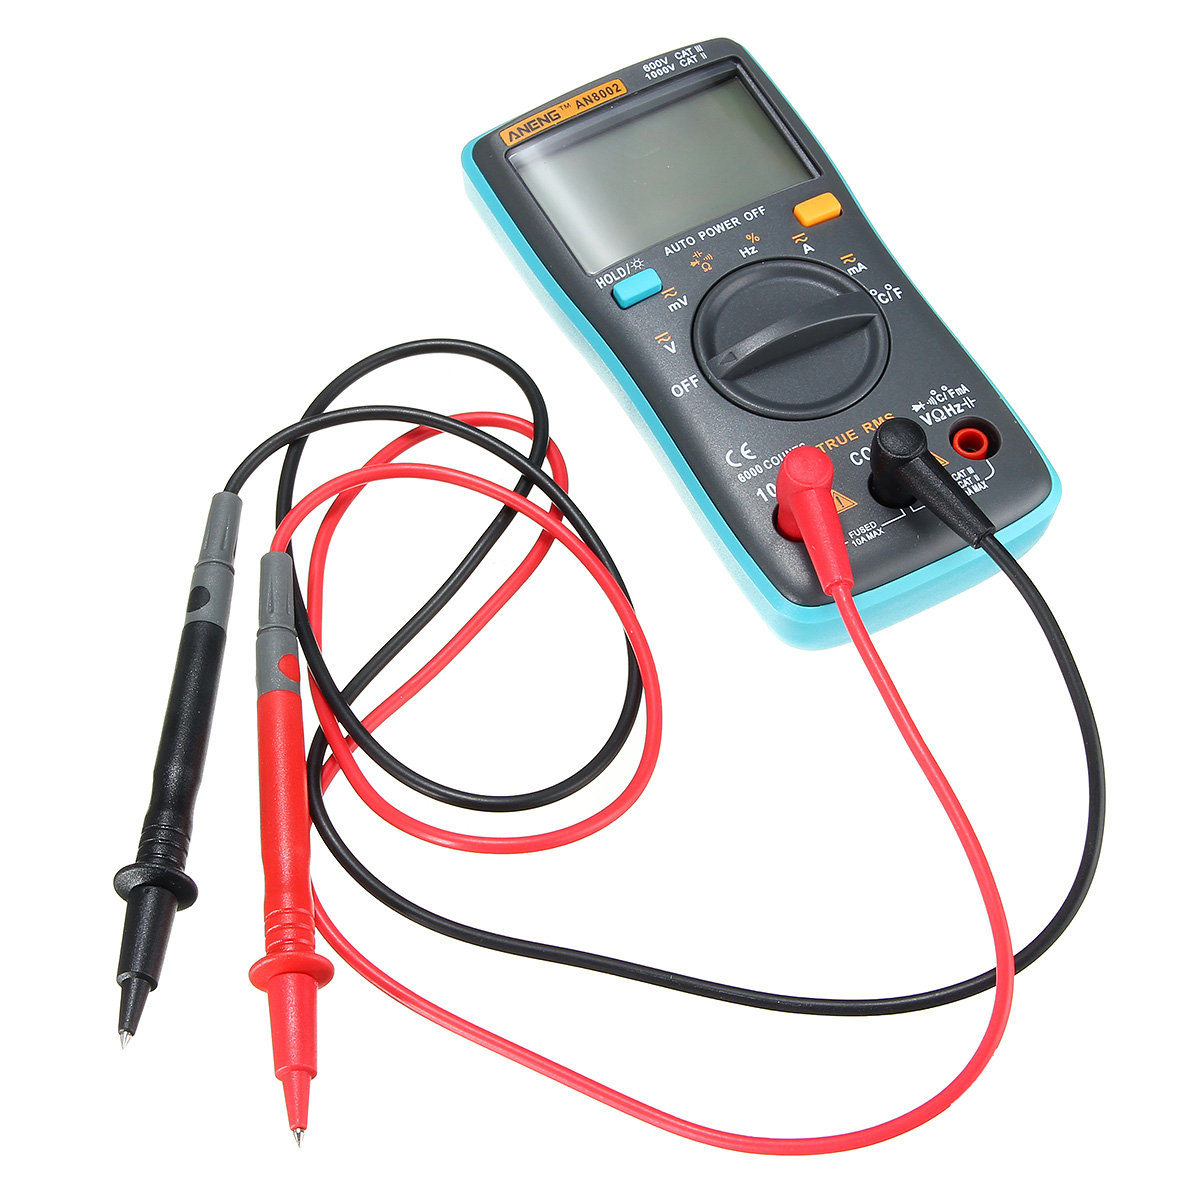 ANENG AN8002 Digital True RMS 6000 Counts Multimeter AC/DC Current Voltage Frequency Resistance Temperature Tester ℃/℉ 61